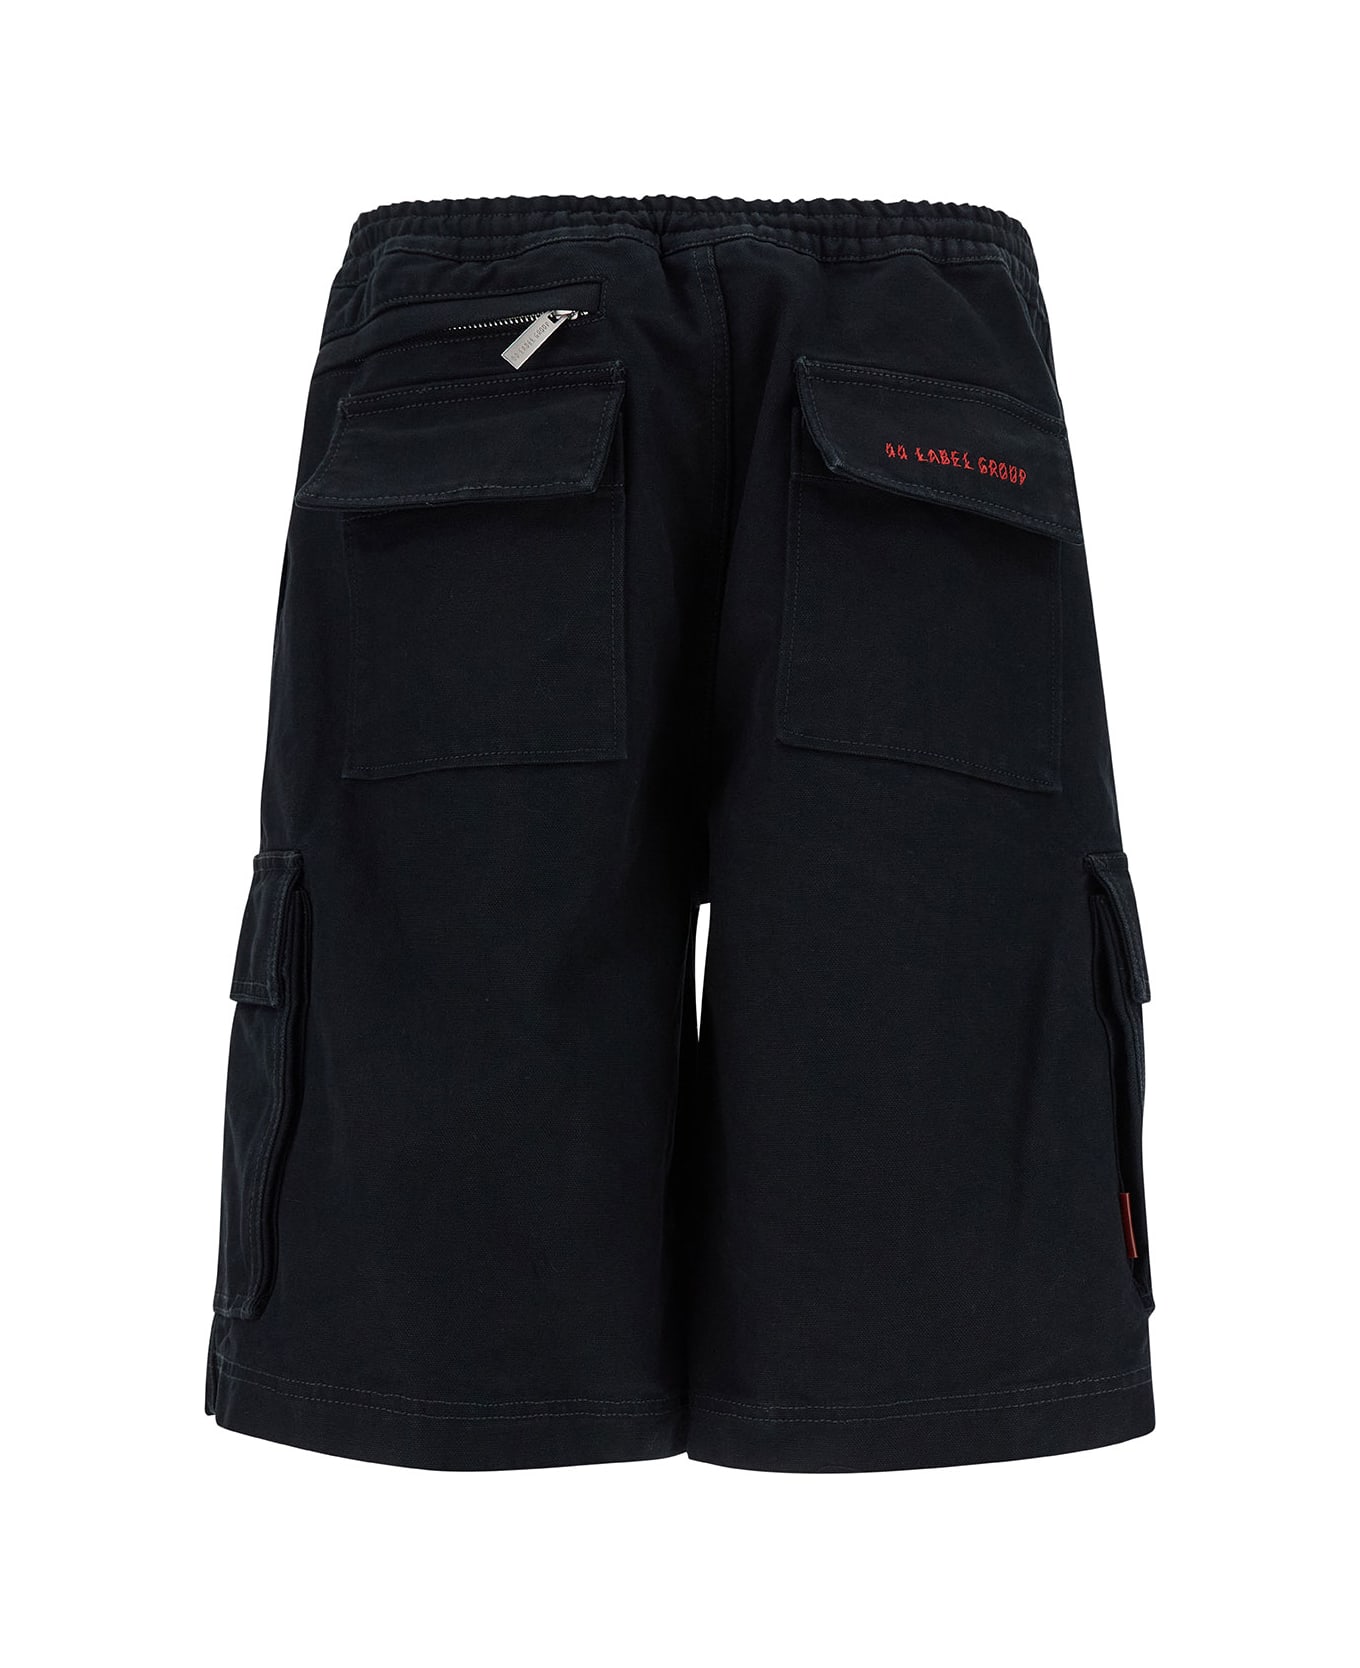 44 Label Group Black Cargo Bermuda Shorts With Logo Embroidery In Cotton Man - Black ショートパンツ